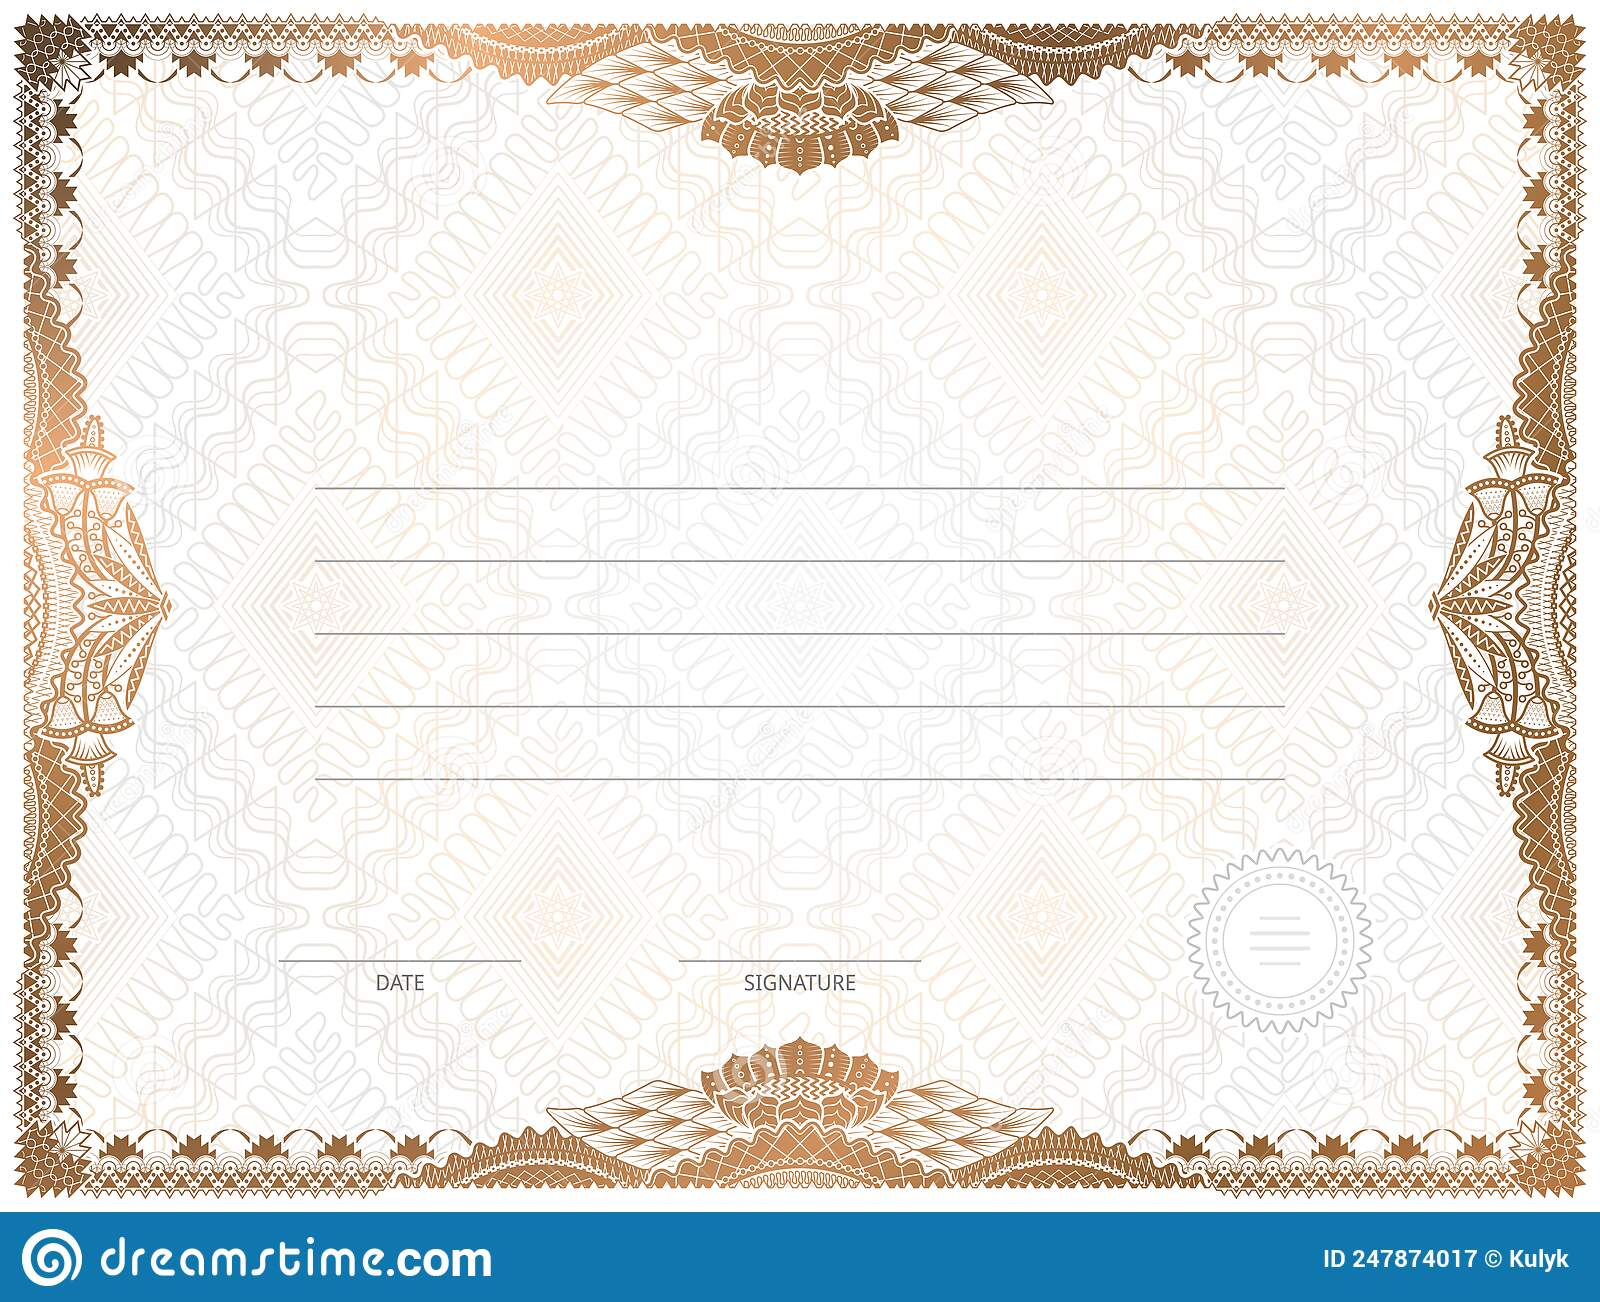 Certificate Template With Guilloche Elements Stock Vector  Intended For Validation Certificate Template